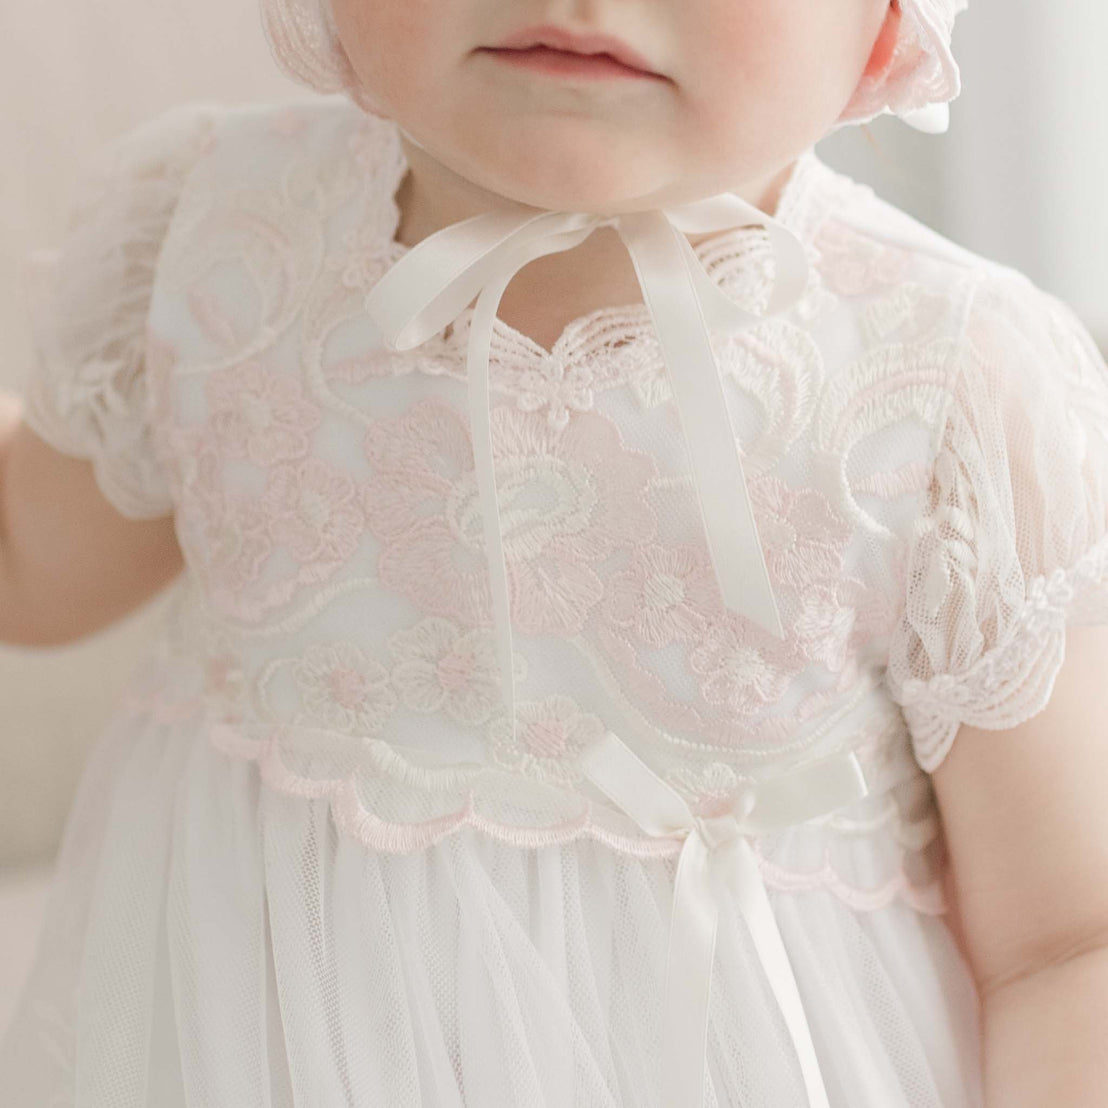 Baby girl christening gown bodice lace detail pink and ivory